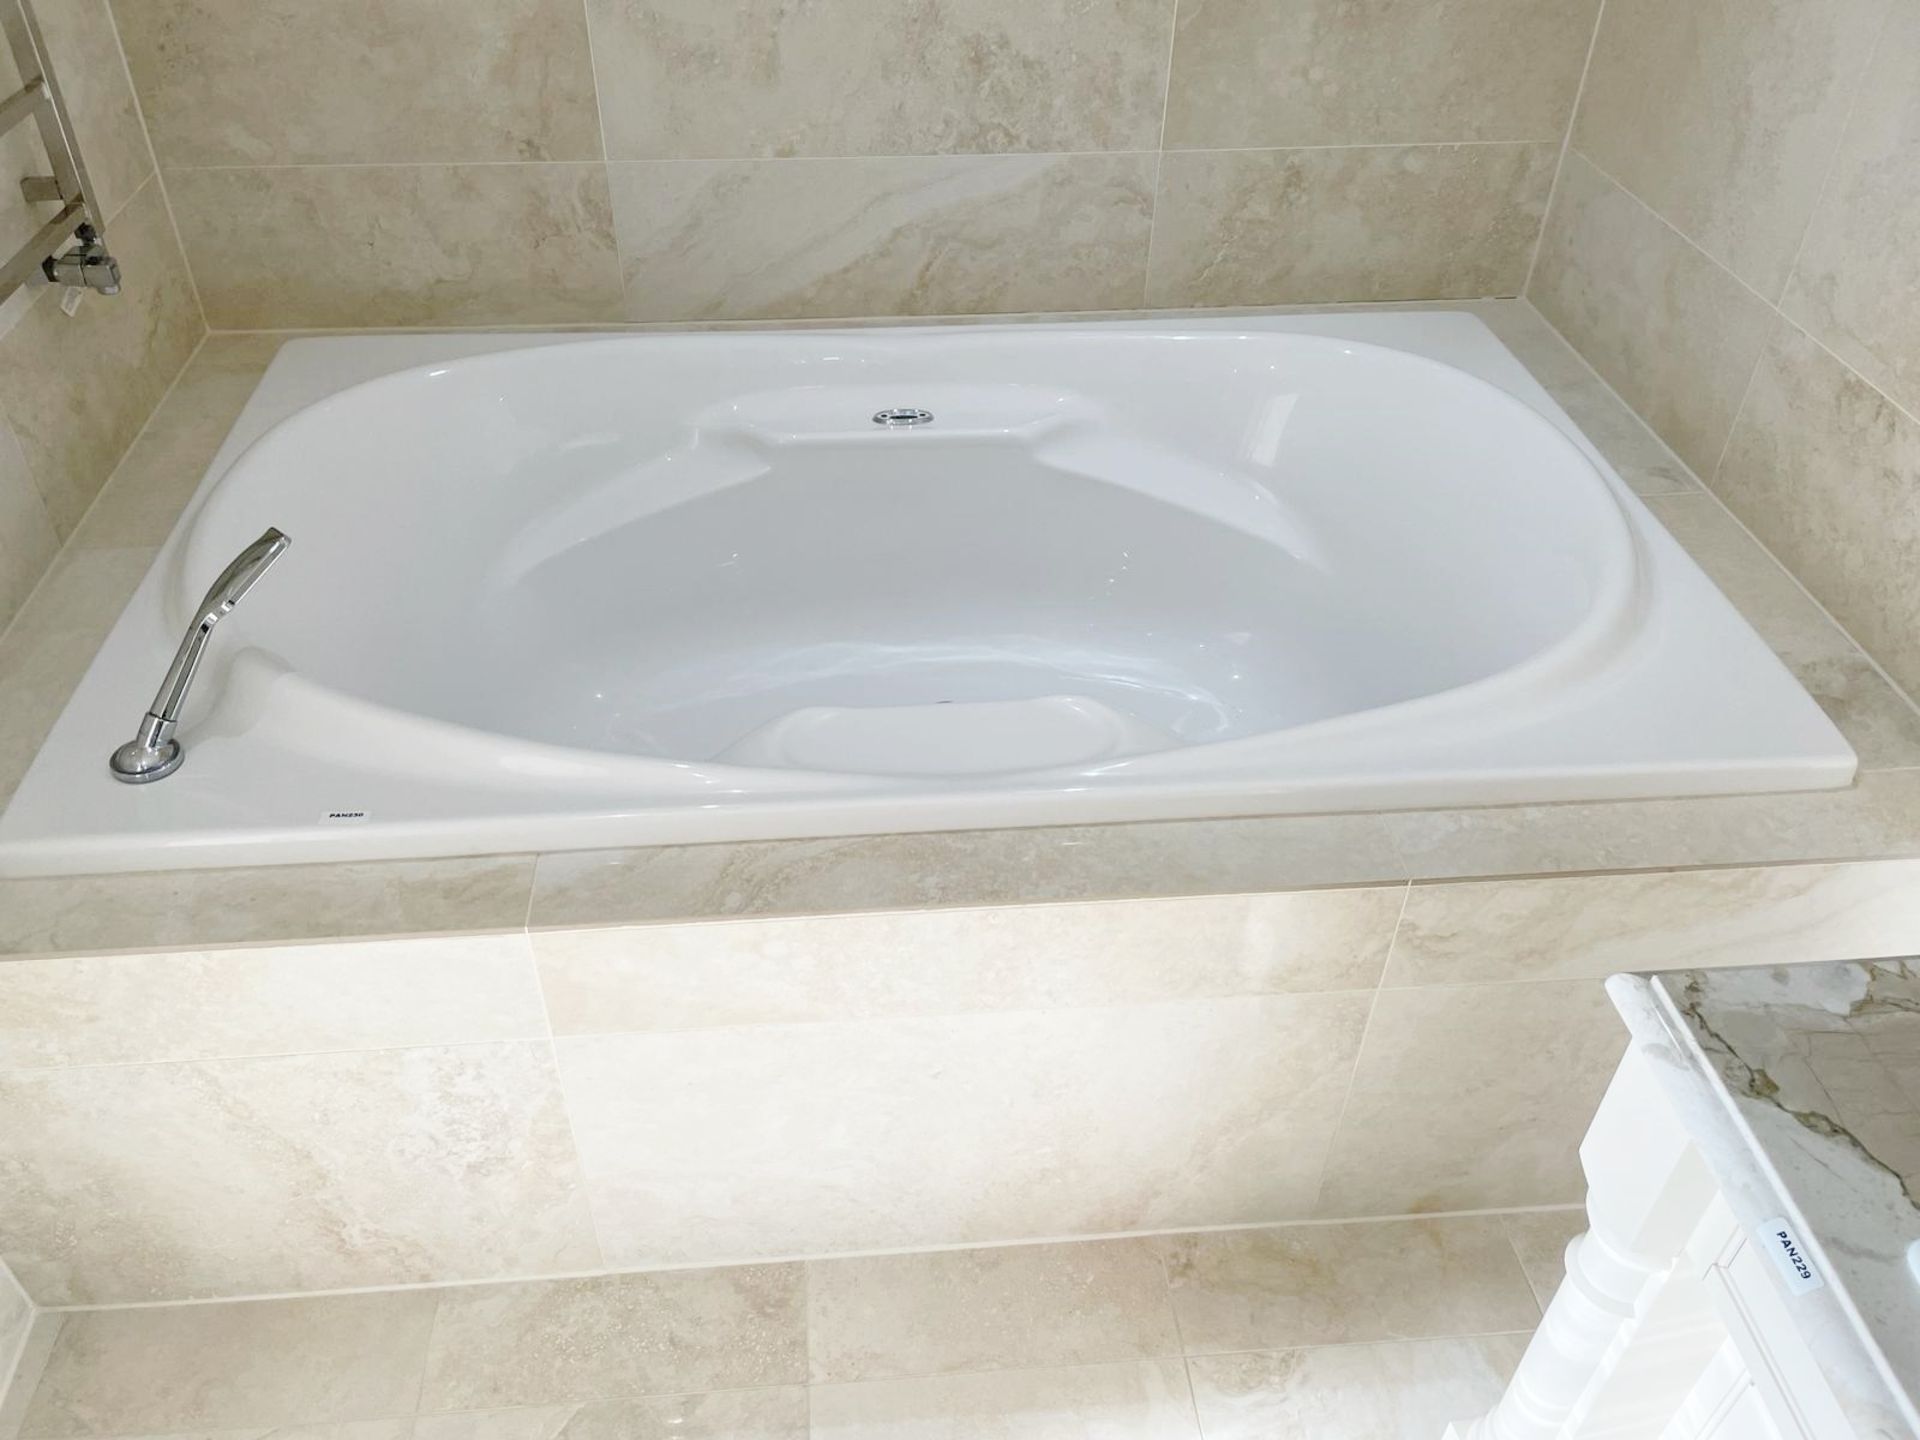 1 x AIRBATH Large Jacuzzi Spa Bath, with Axor Thermostat  - Ref: PAN230 Bed1/bth - CL896 - NO VAT - Image 18 of 20